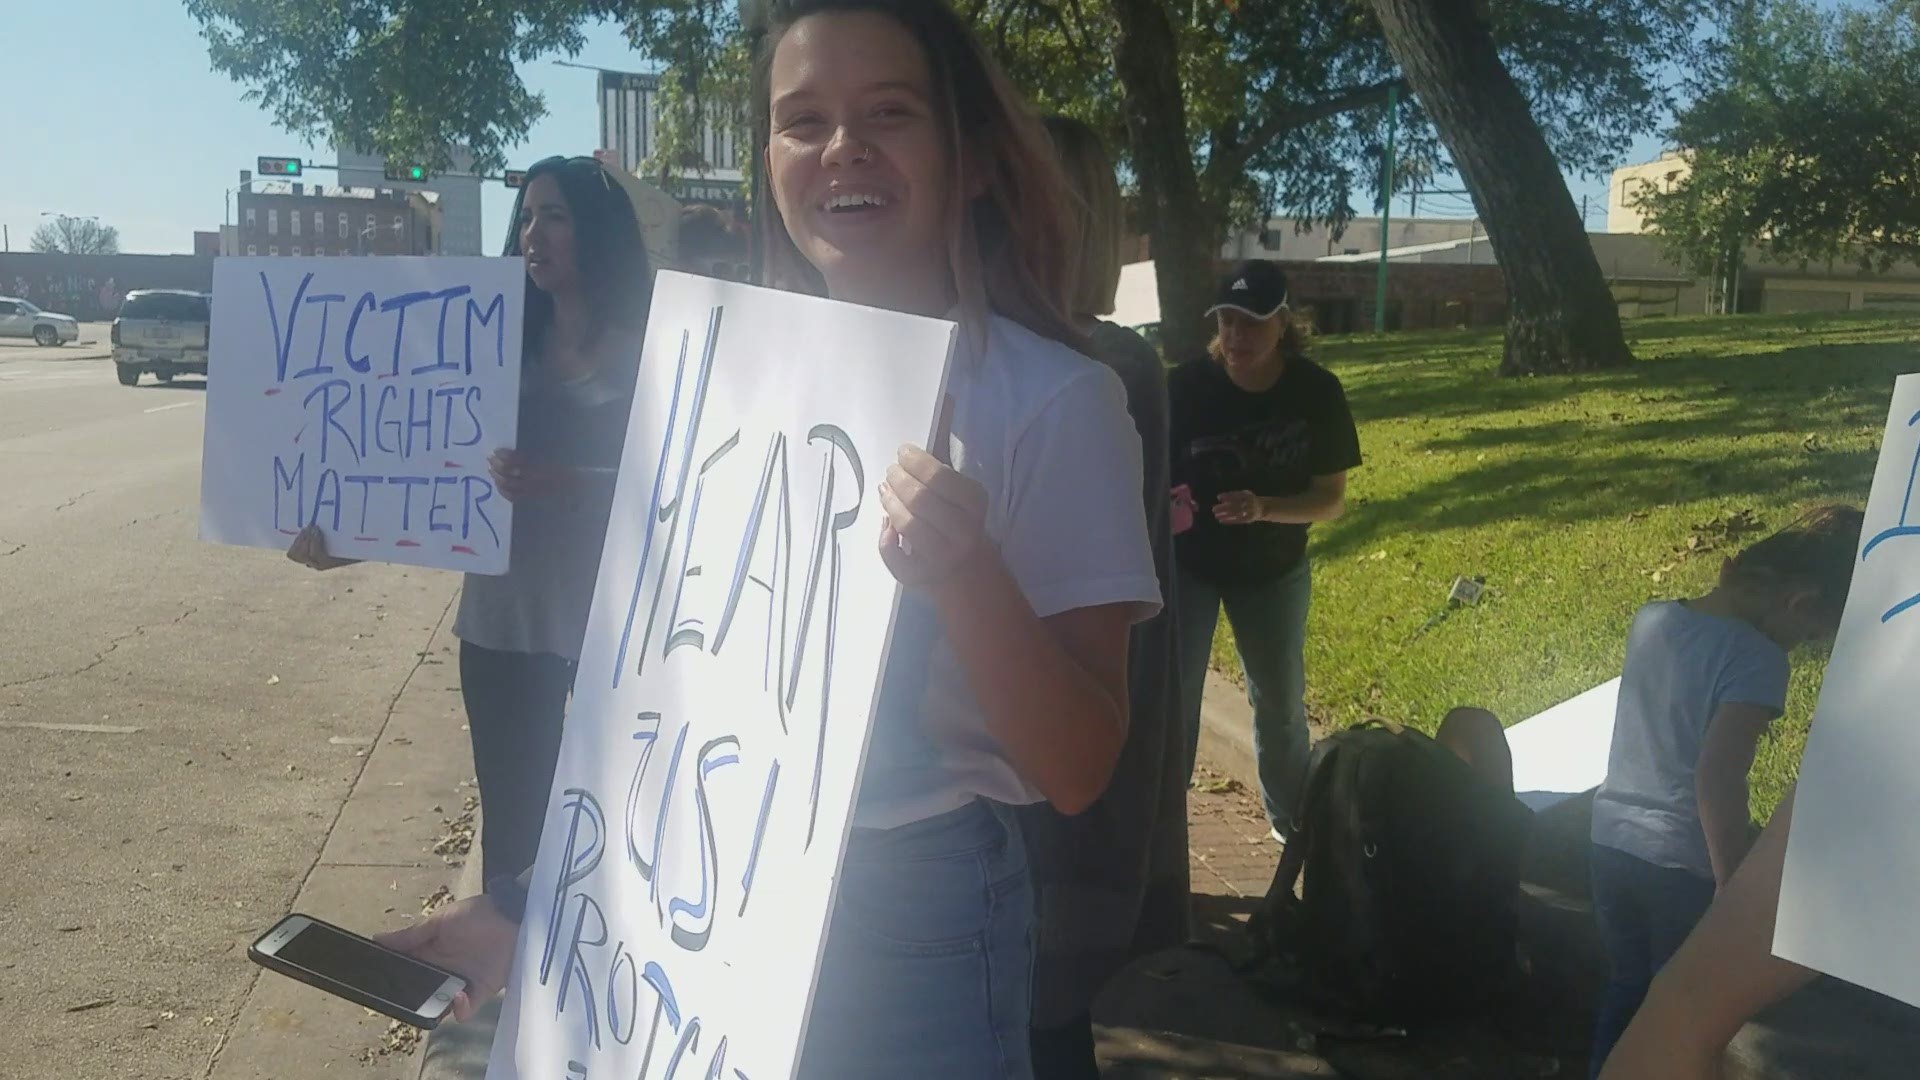 More than a dozen people lined the street outside the McLennan County Courthouse Friday in protest of a plea deal given to a former Baylor University fraternity member who was charged with rape.